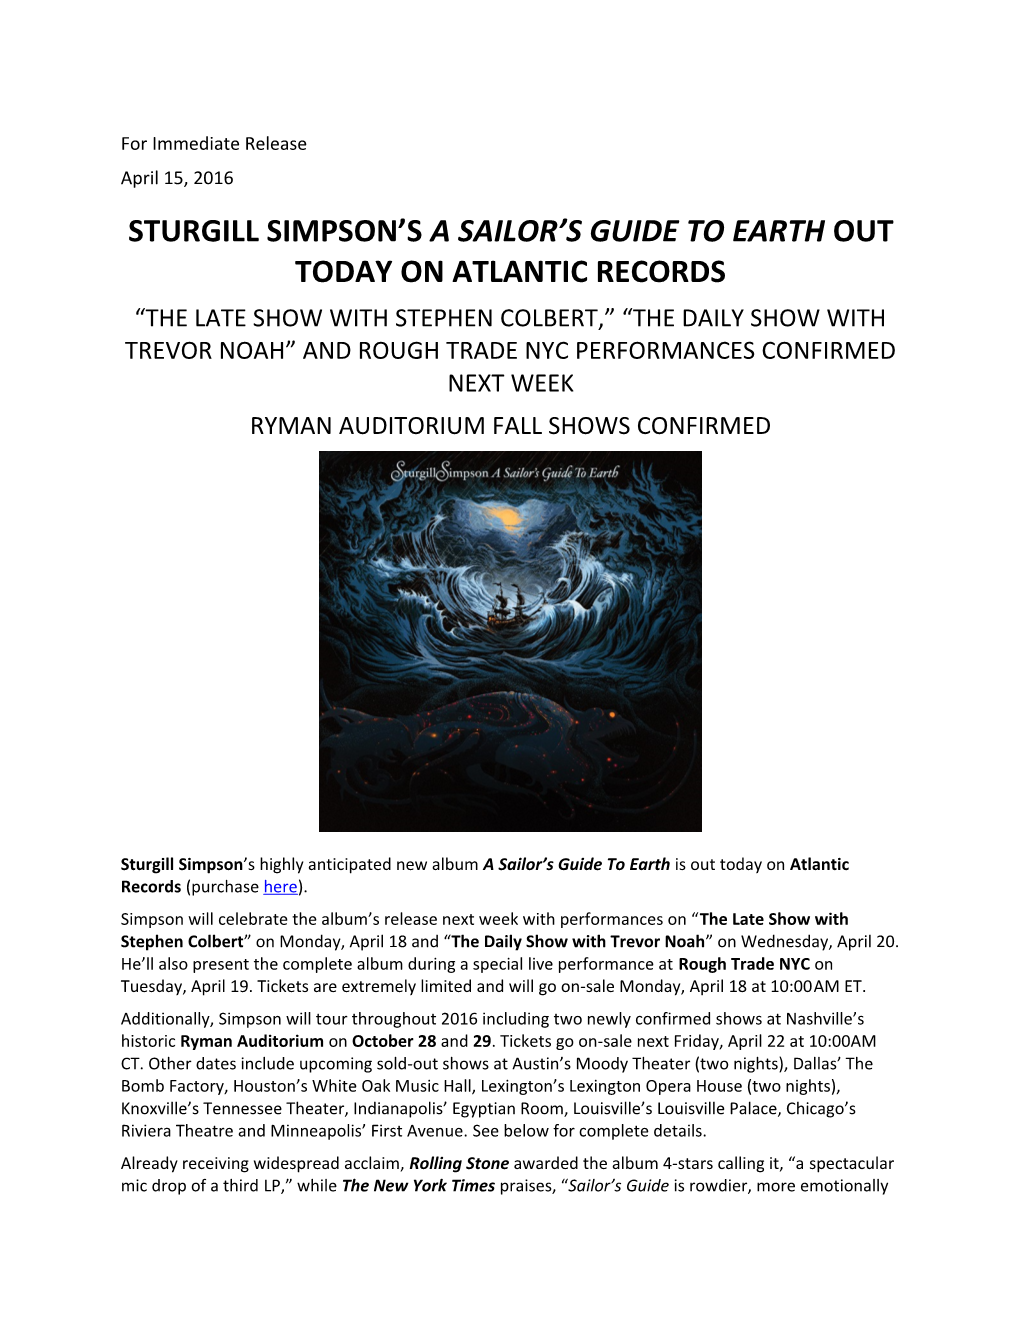 Sturgill Simpson S a Sailor S Guide to Earth out Today on Atlantic Records